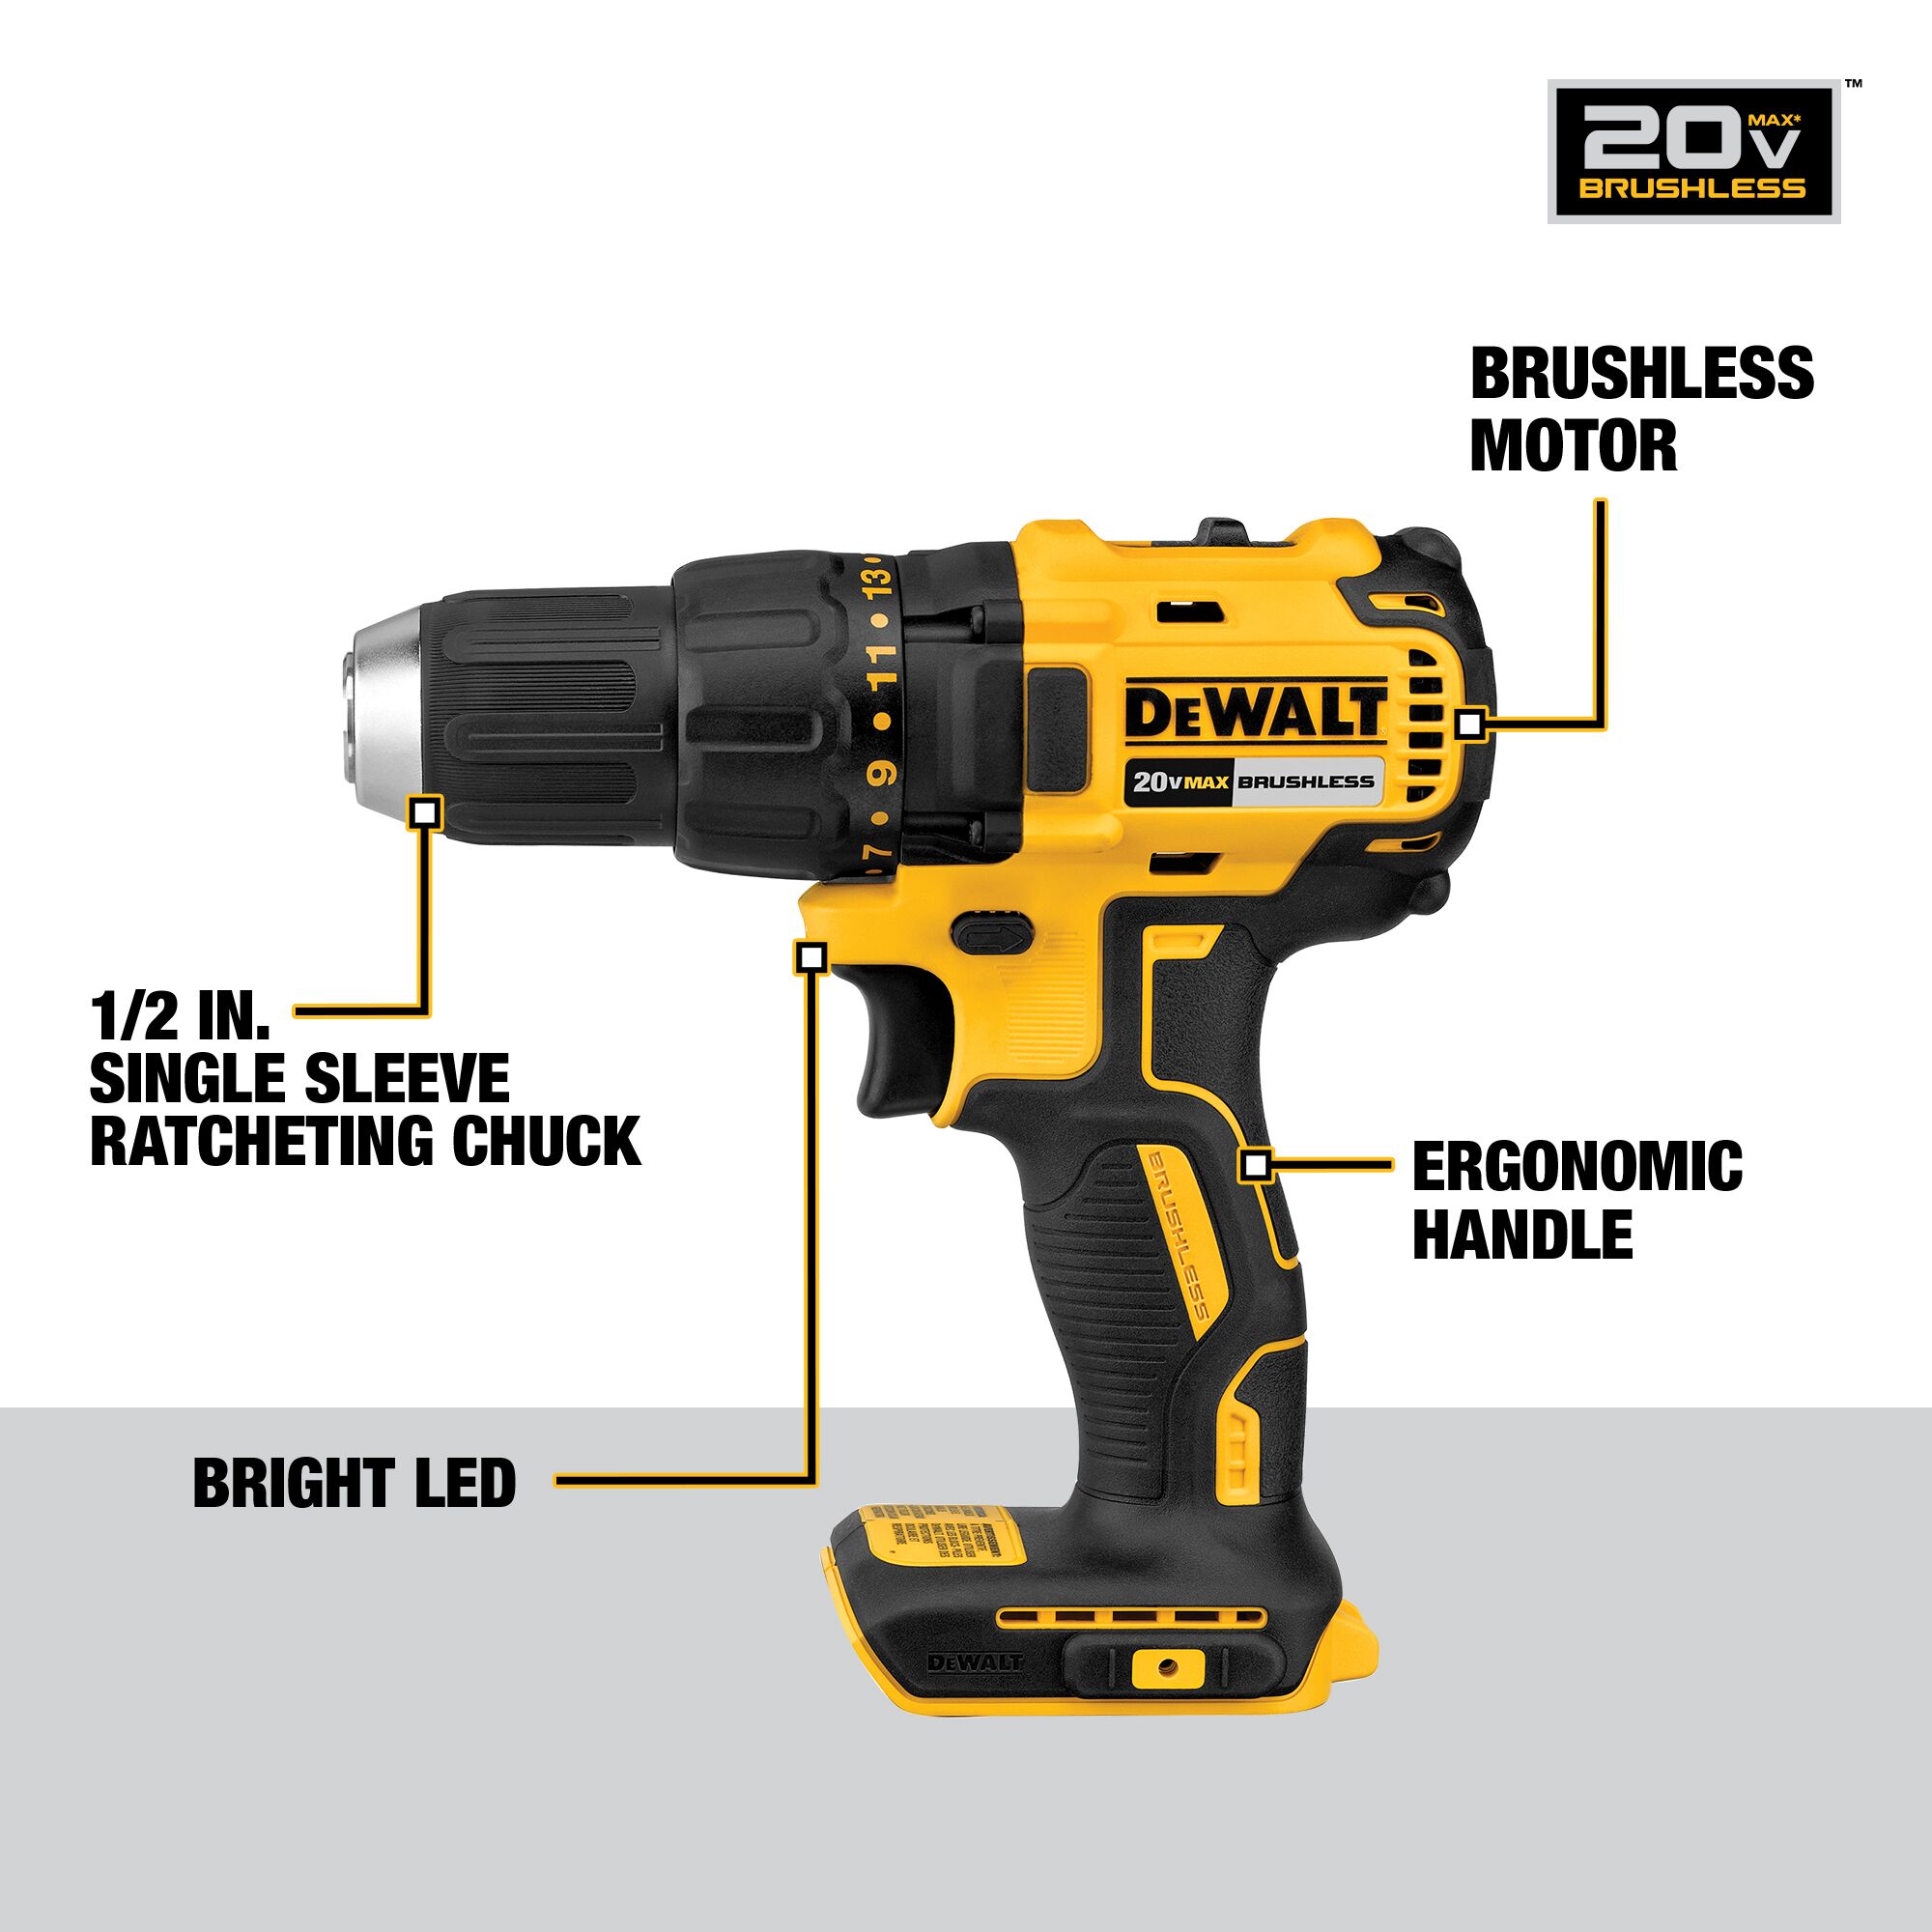 Lowes Clearance - Now $120 from $599 - DEWALT 5-Tool 20-Volt Max Power Tool  Combo Kit with Soft Case : r/Tools